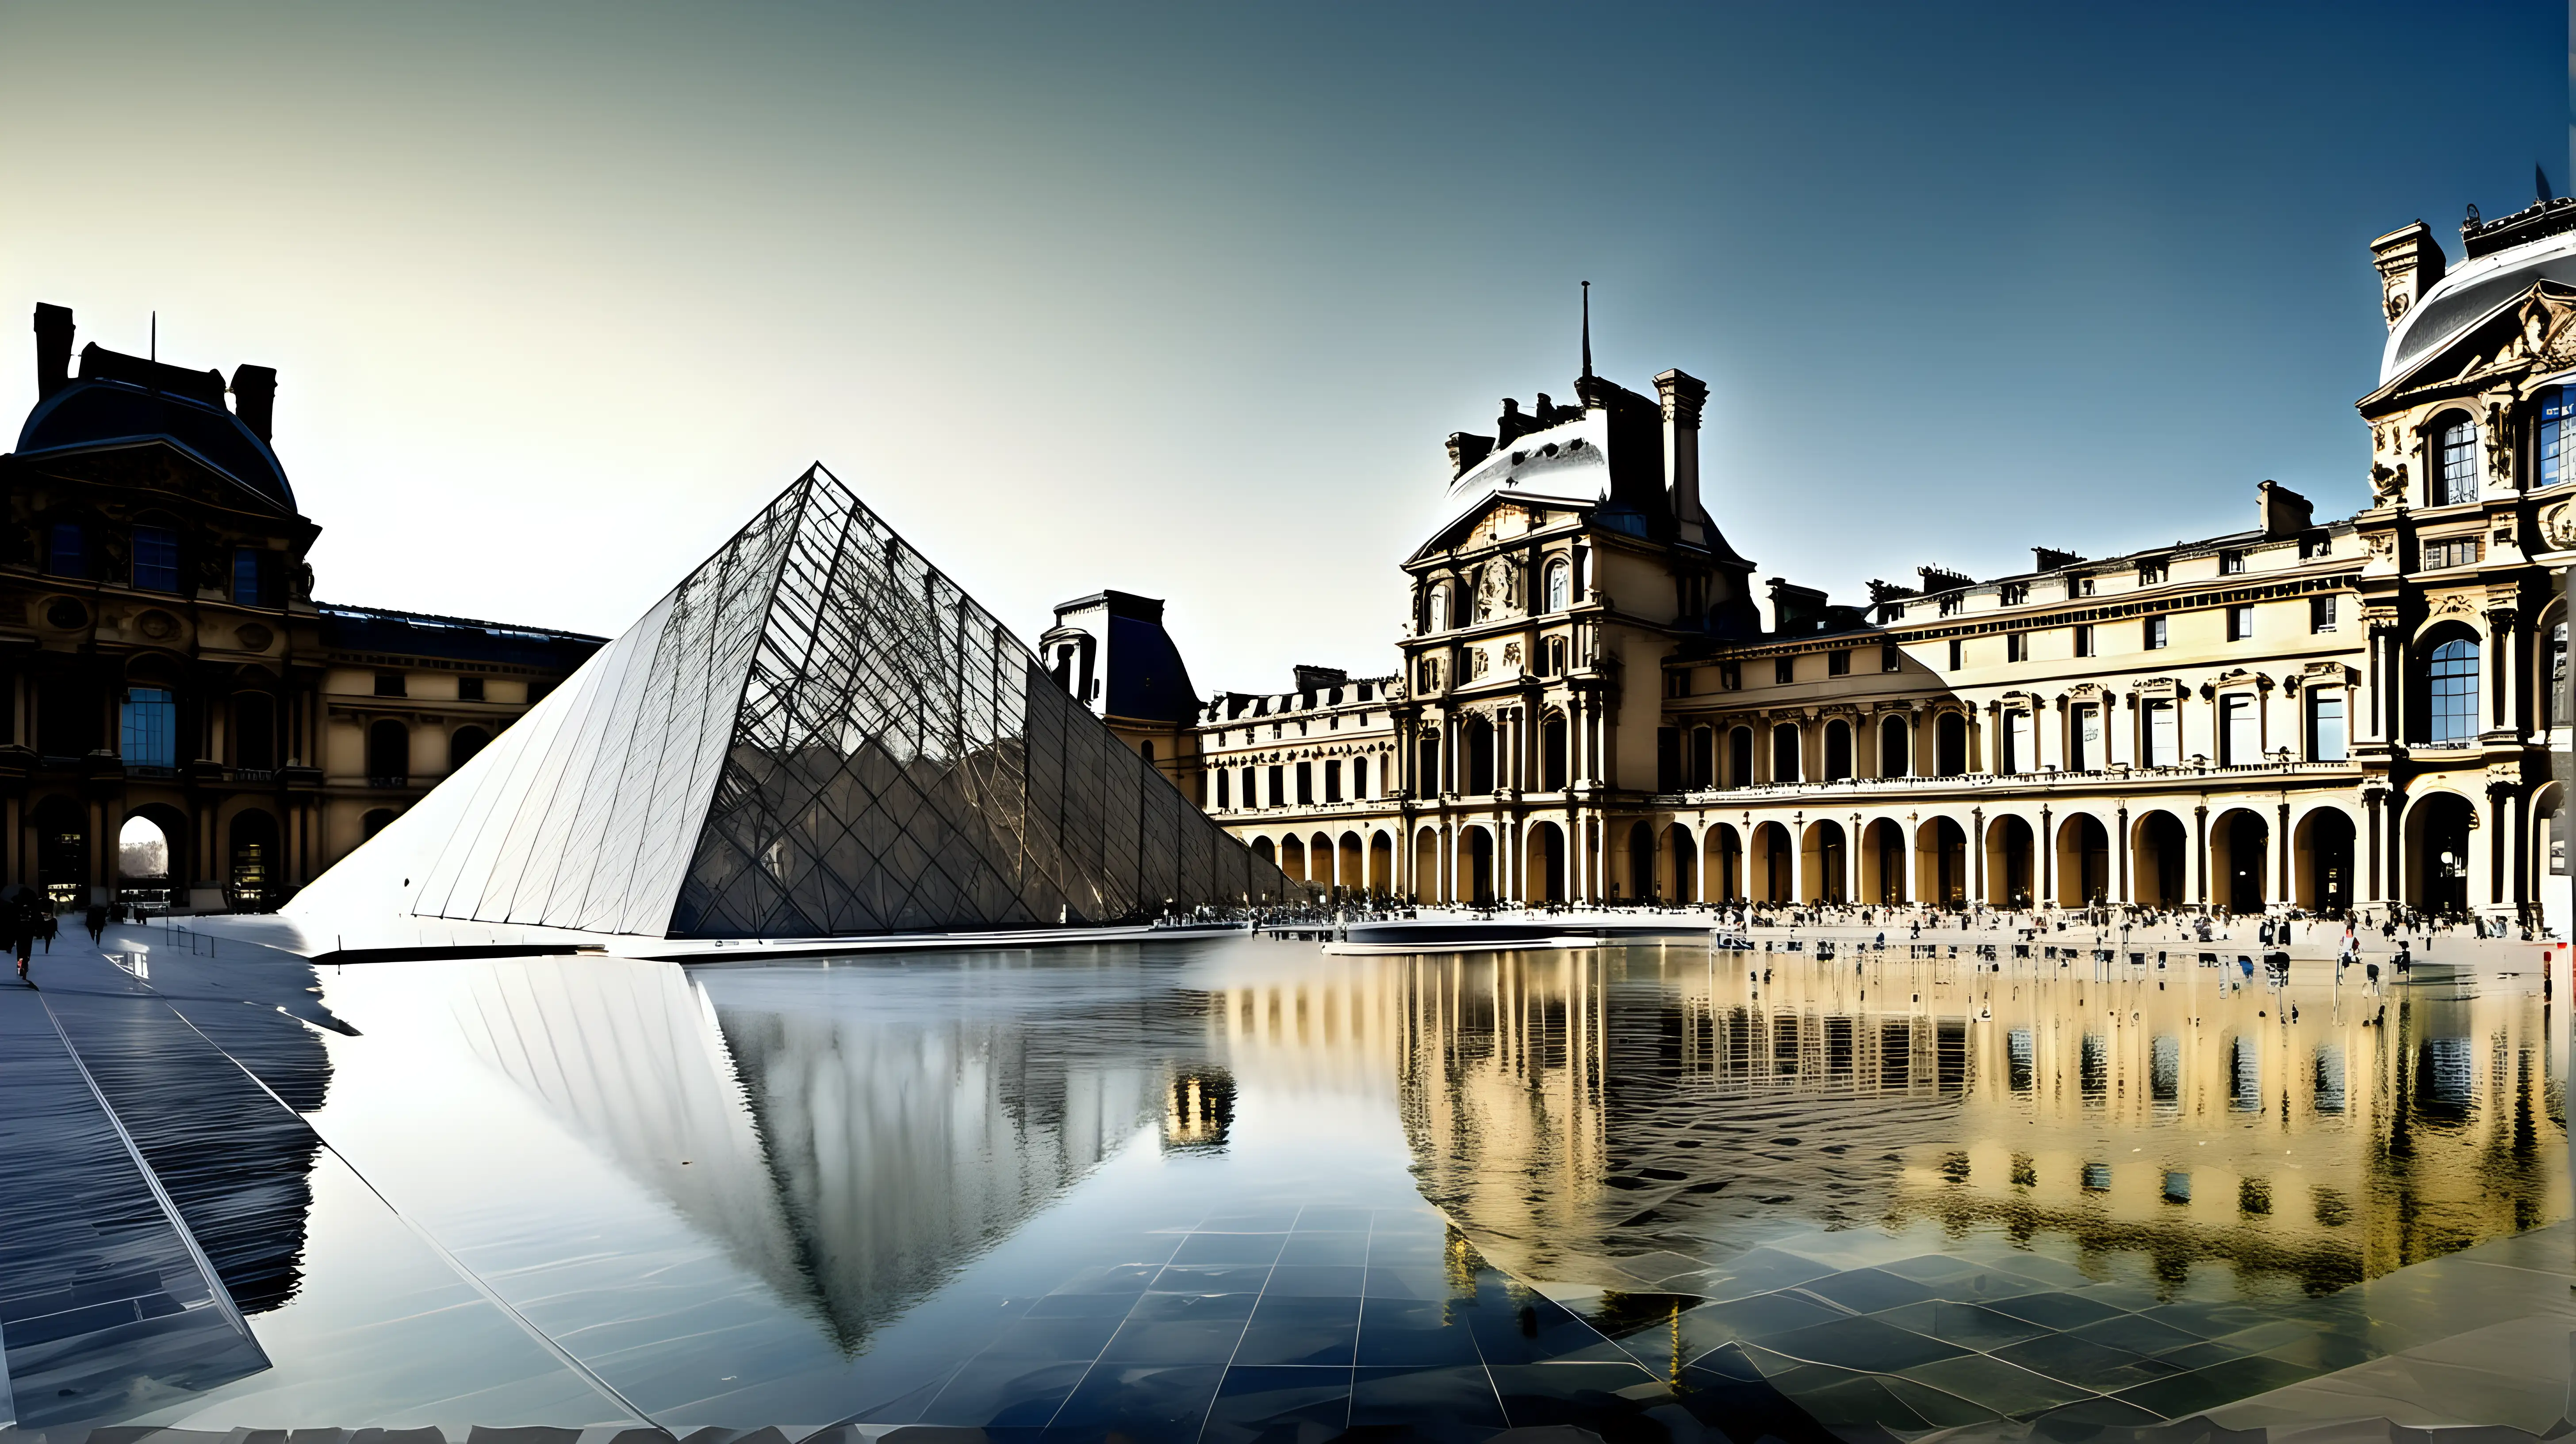 show The Louvre (Paris, France) at its best shape and show its beauty roylaty and greatness,a wide angle image showing The Louvre (Paris, France) at its peak beauty